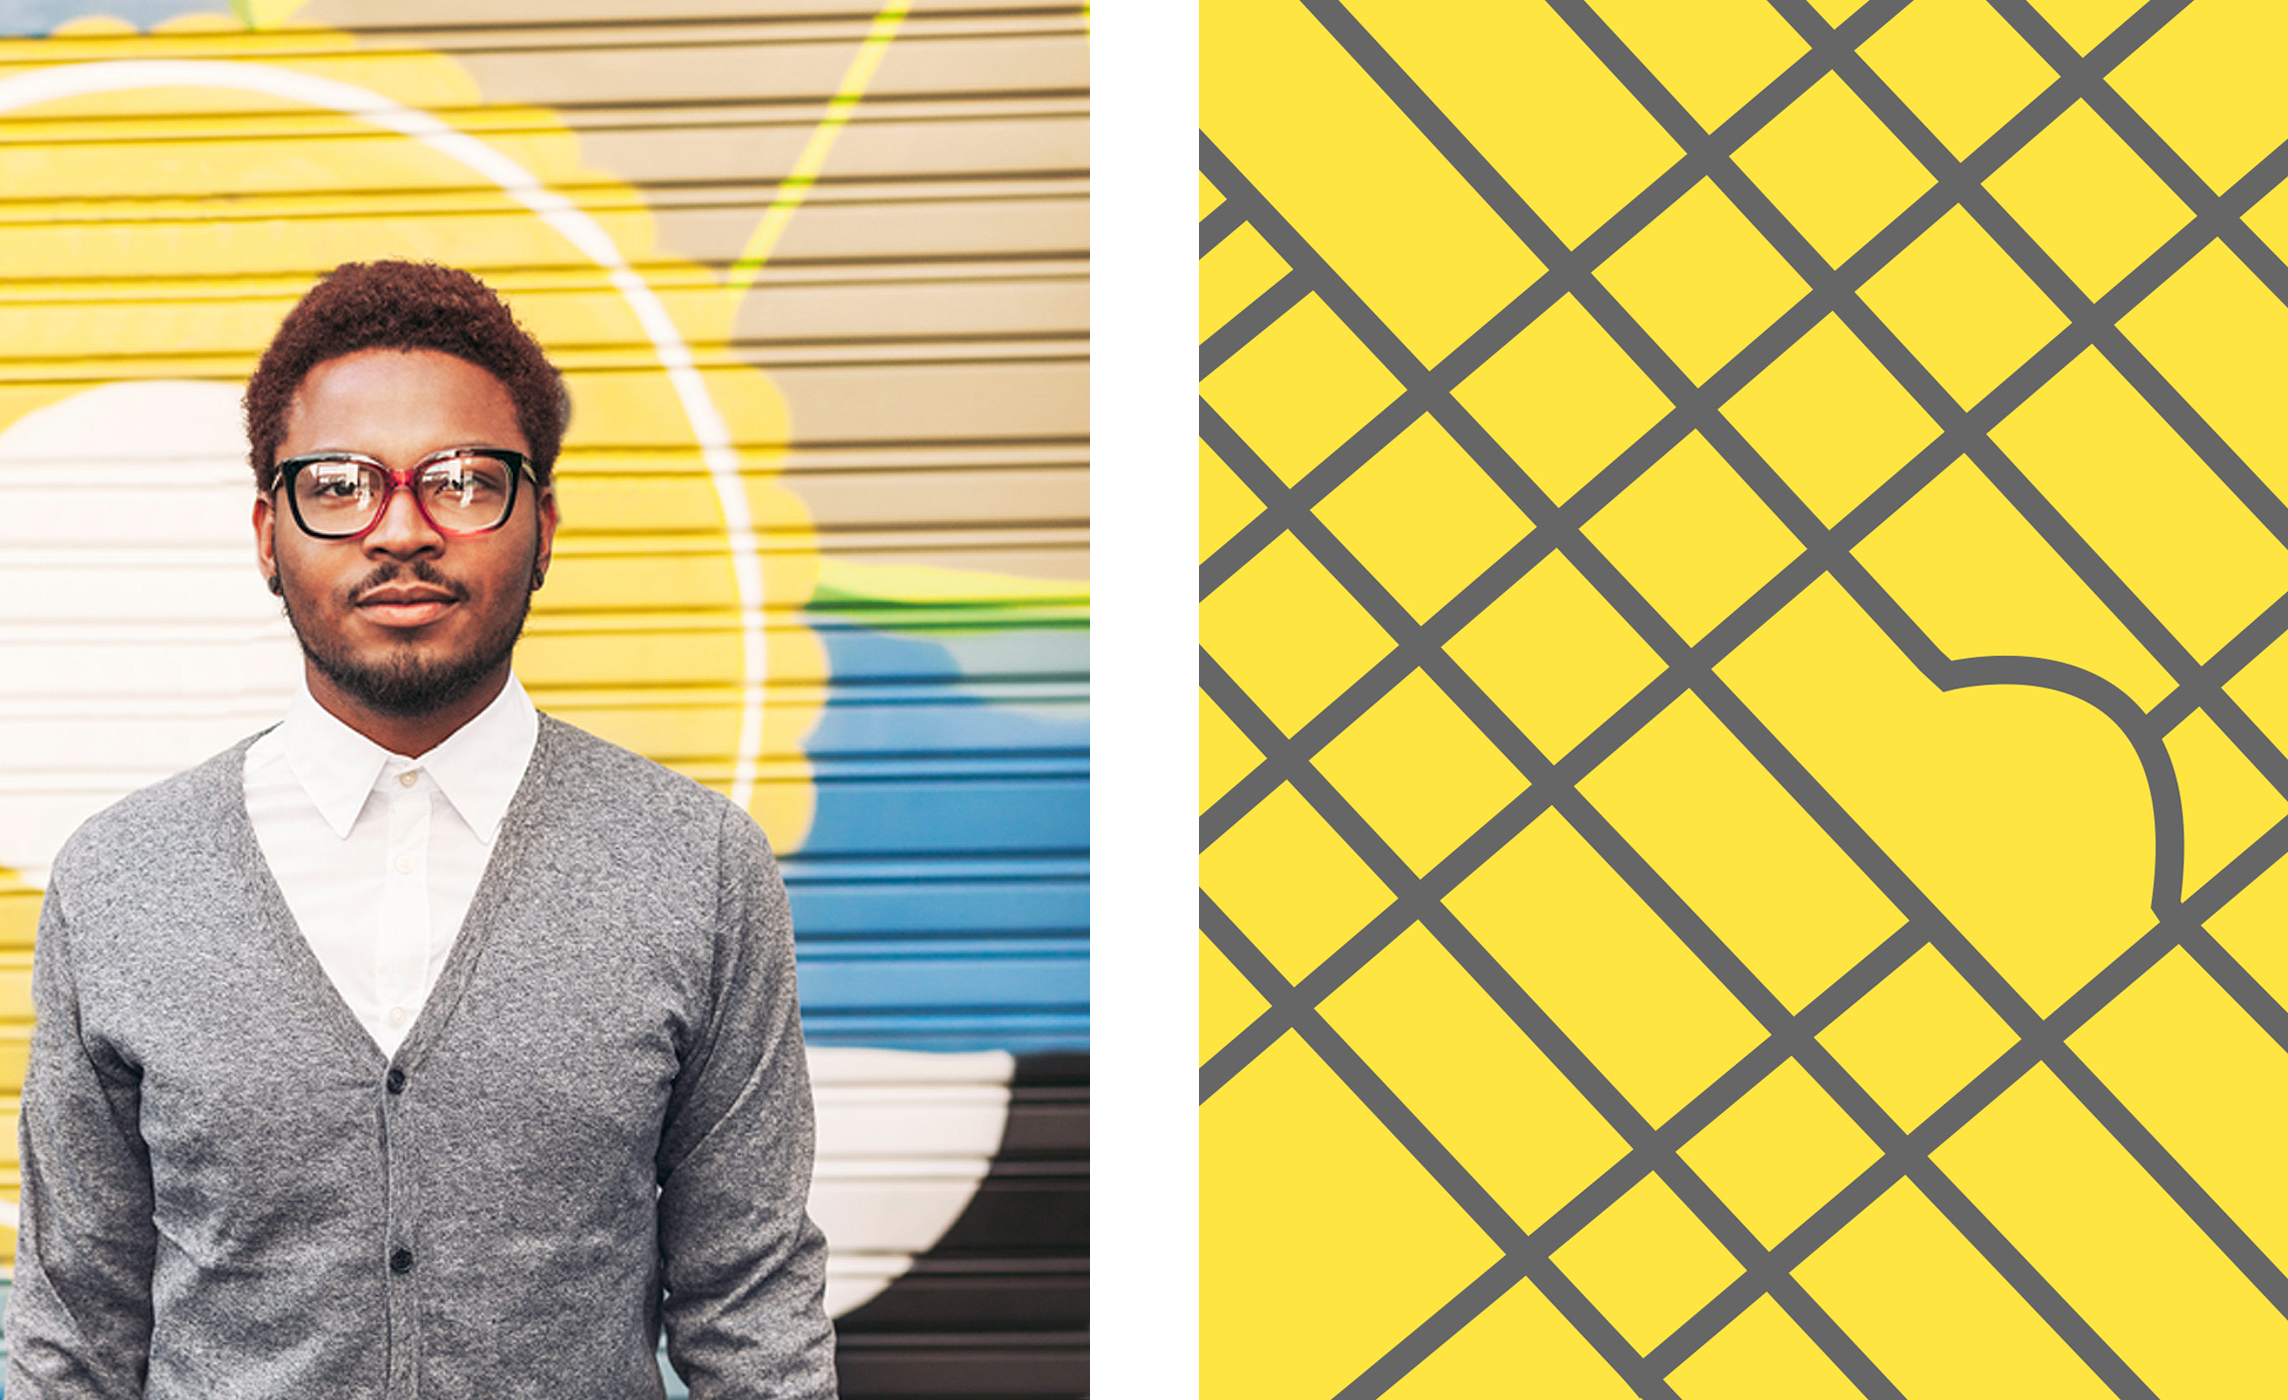 portrait of a black man 30s wearing glasses in a gray sweater next to yellow city street graphic